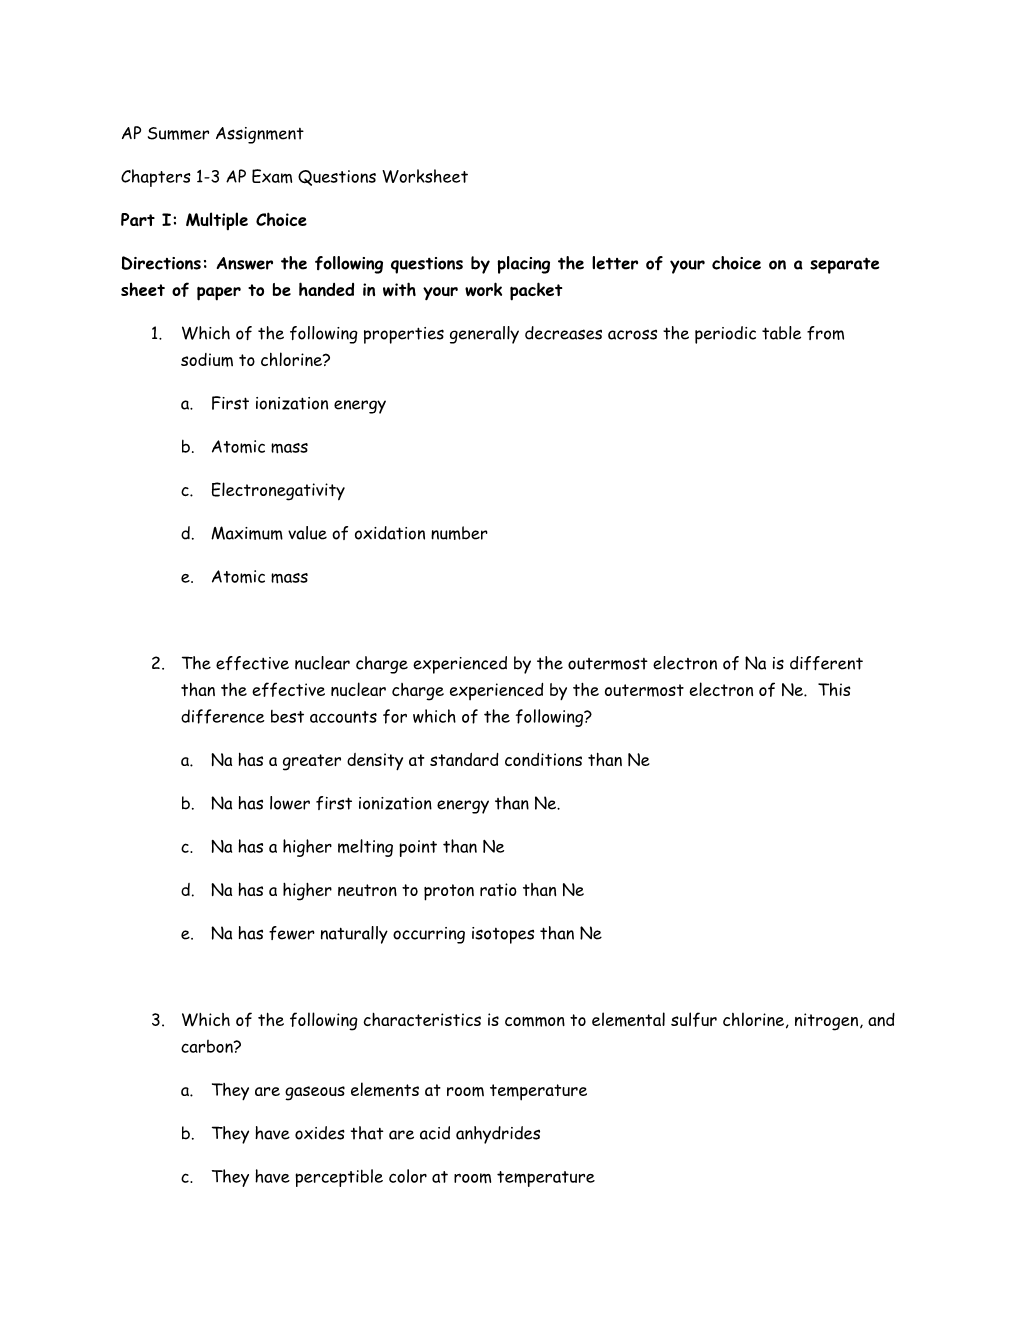 Chapters 1-3 AP Exam Questions Worksheet